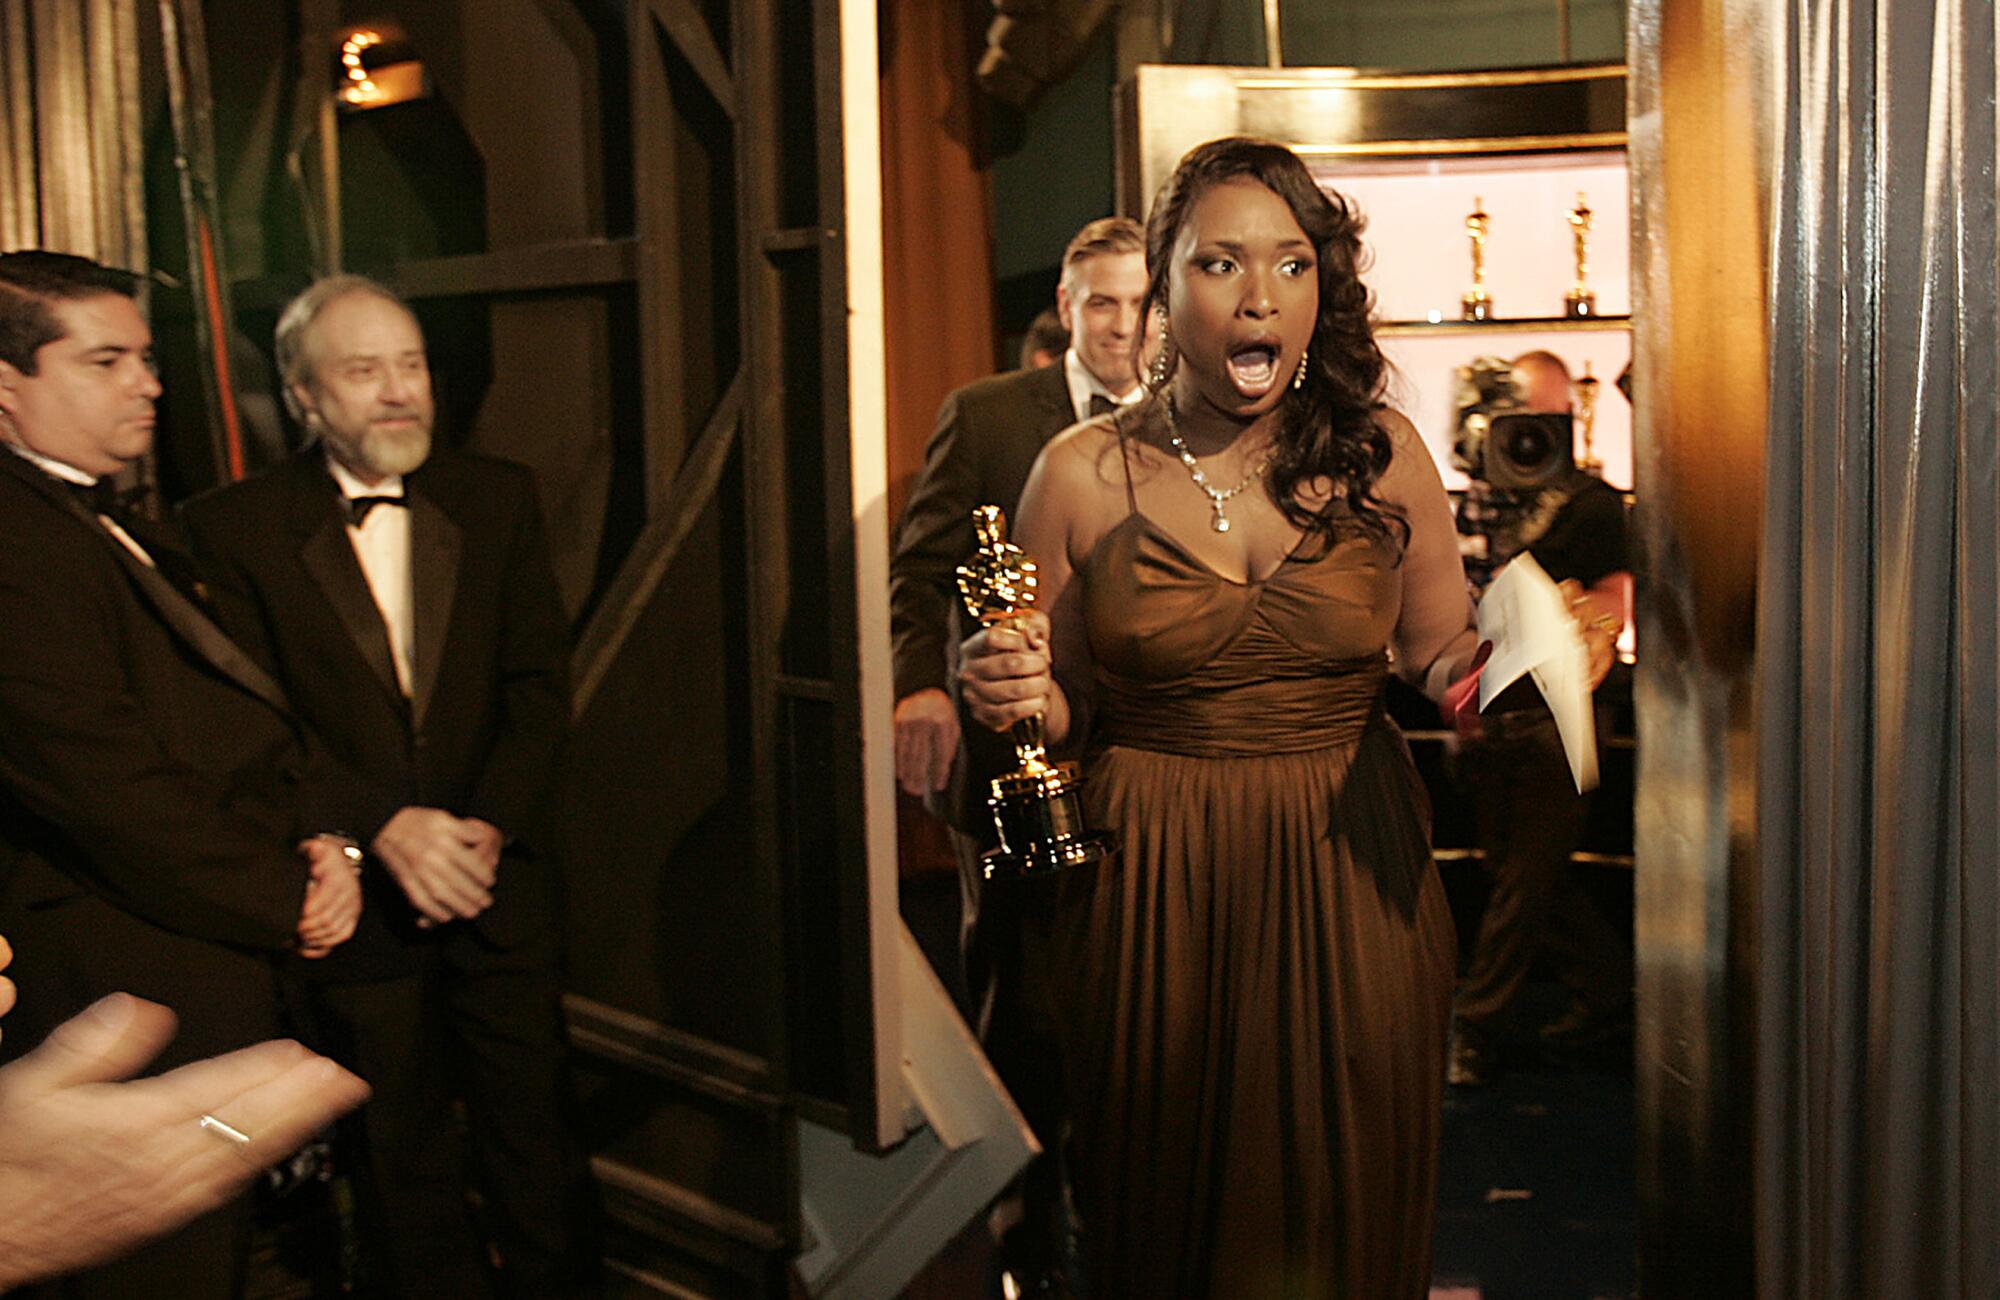 2007: Jennifer Hudson is open-mouthed in excitement exiting the stage with her supporting actress Oscar